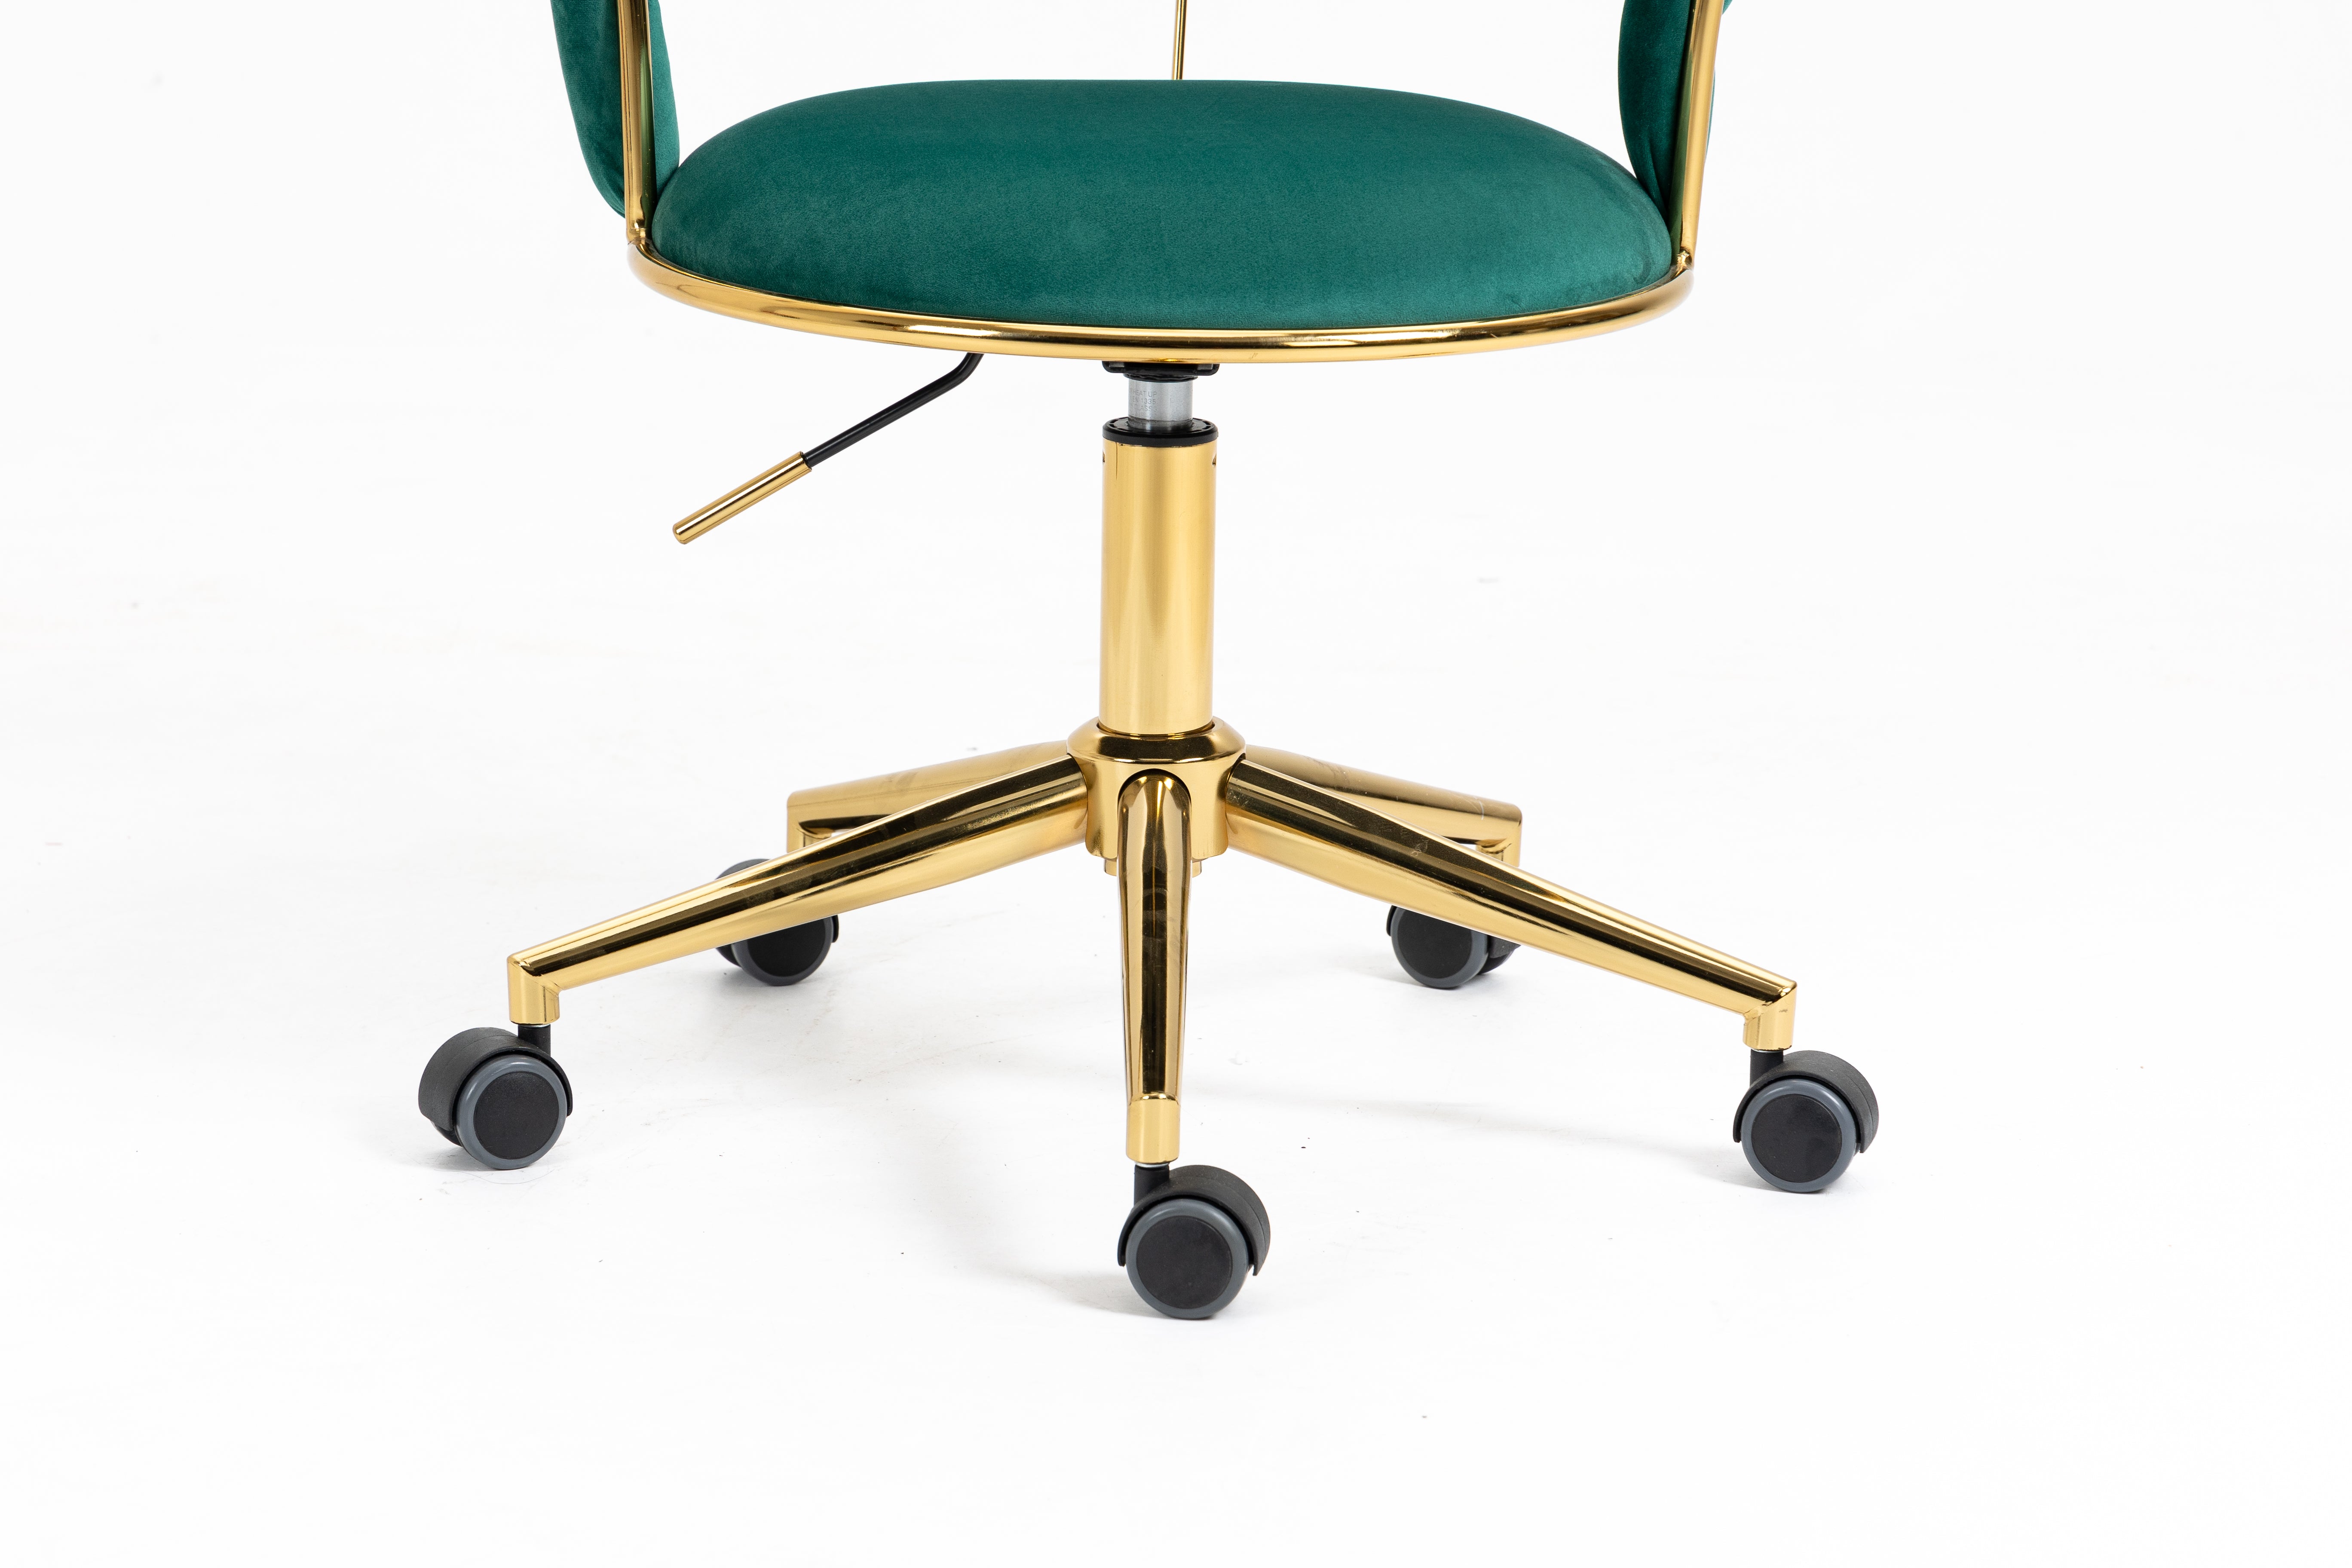 Swivel Adjustment Chair with Stainless Steel Base 5-wheel